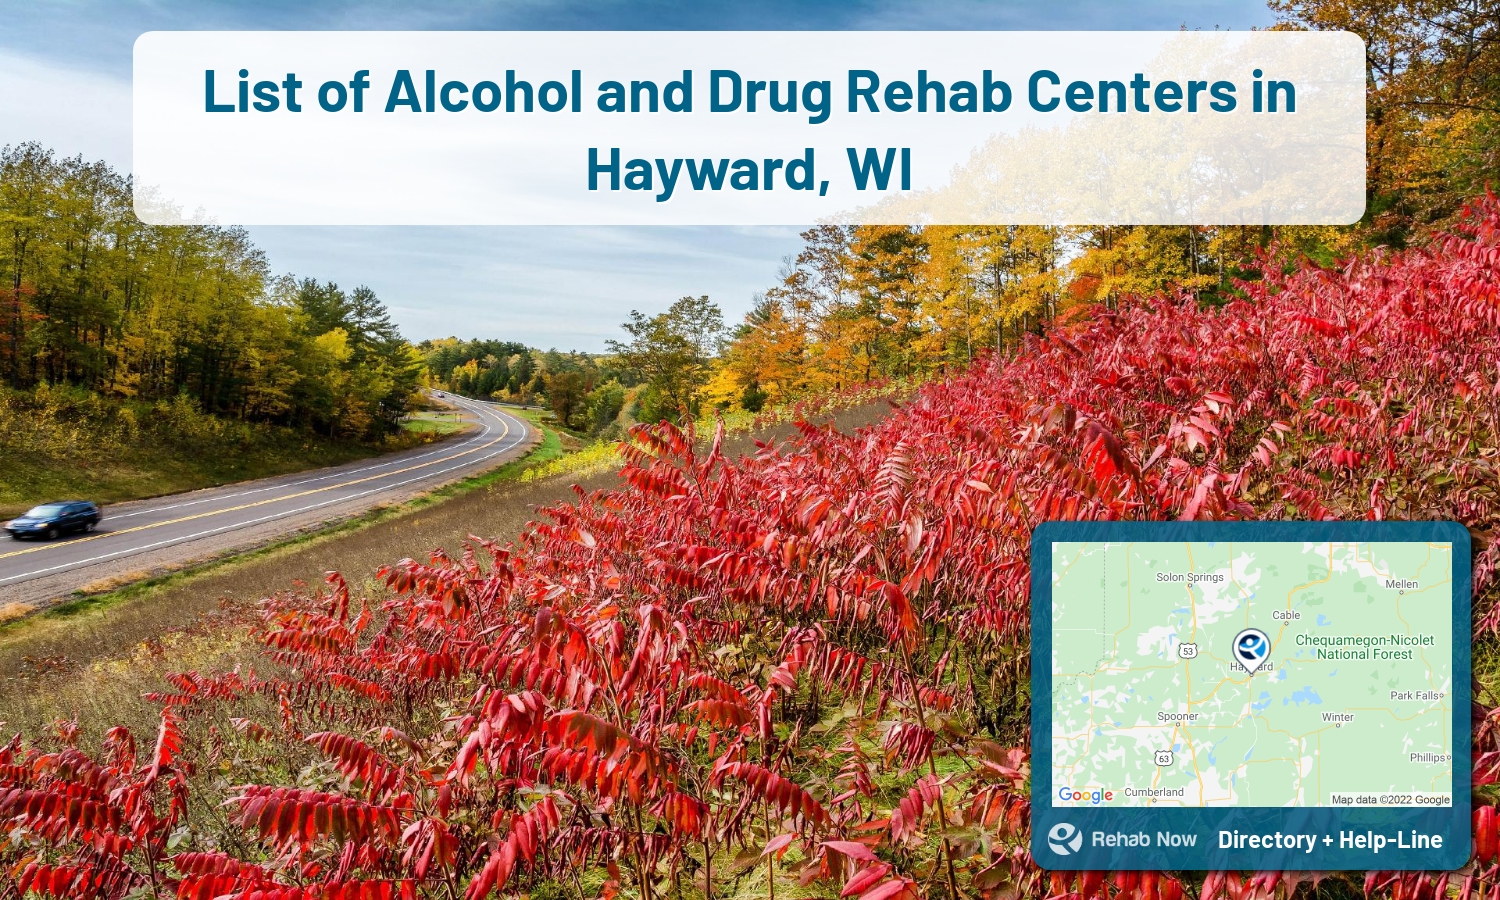 Easily find the top Rehab Centers in Hayward, WI. We researched hard to pick the best alcohol and drug rehab centers in Wisconsin.